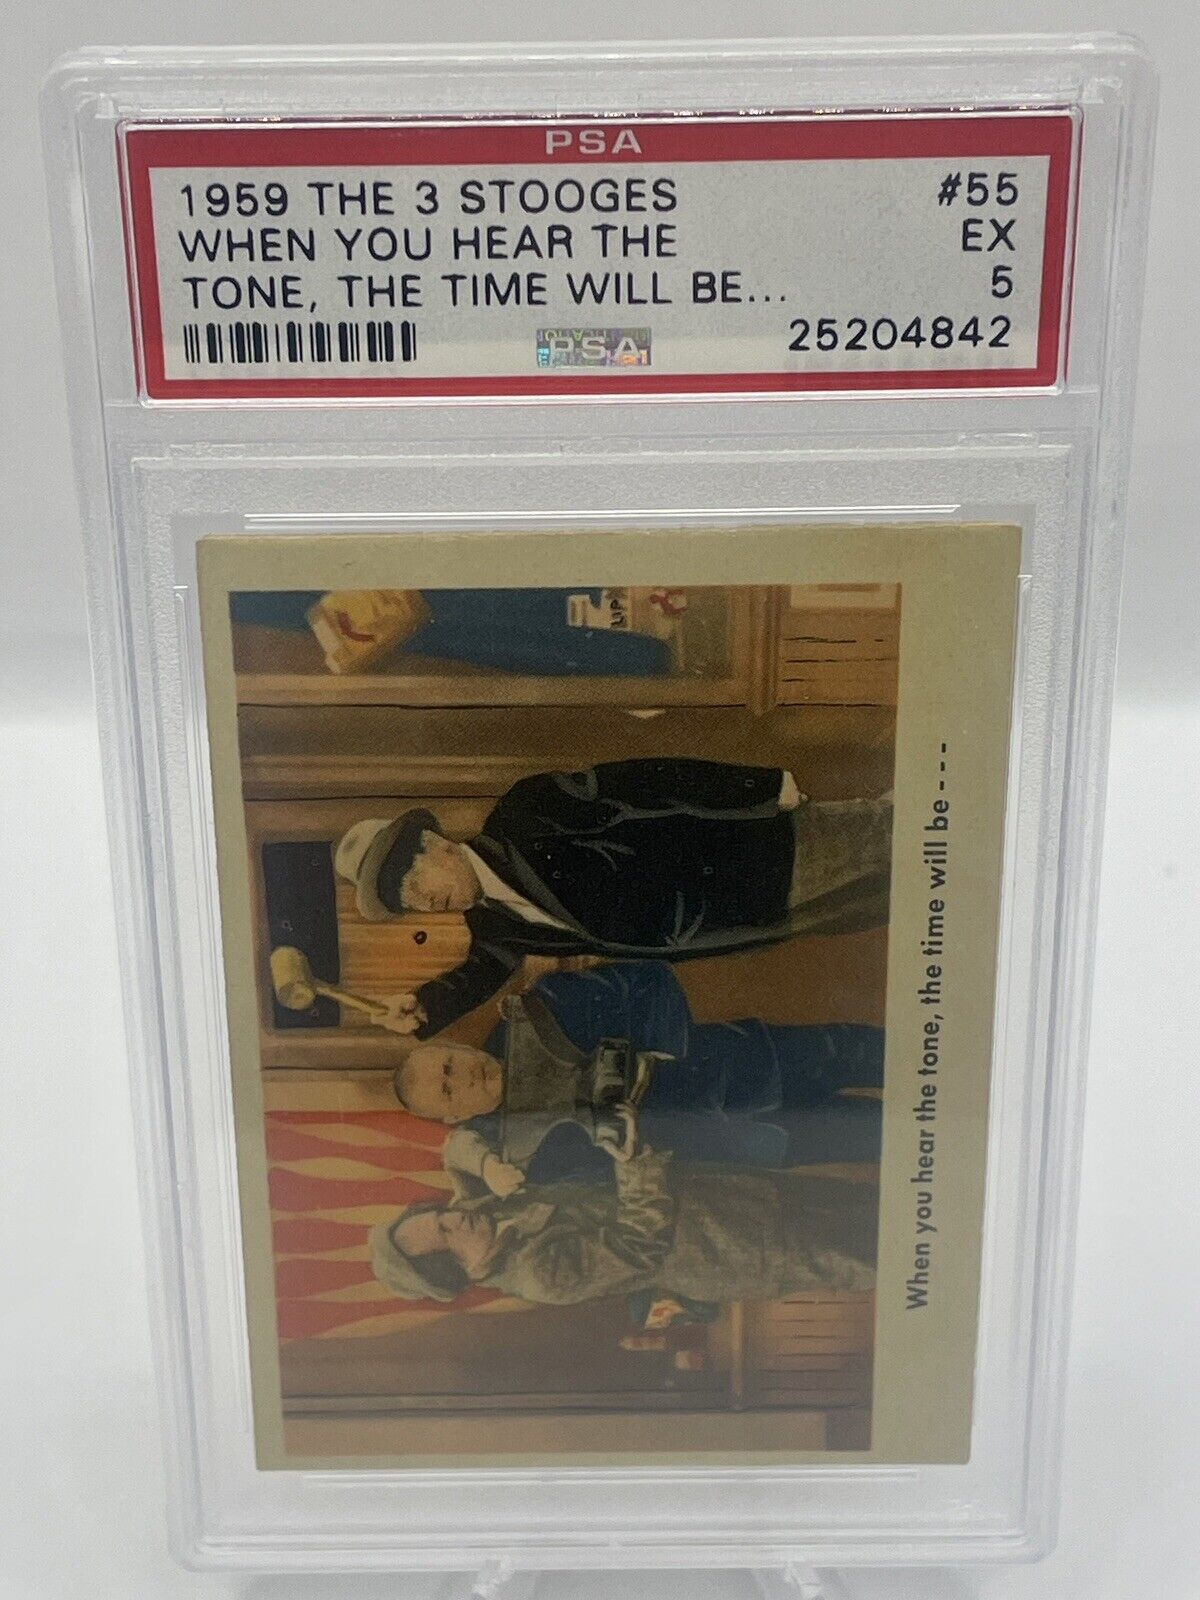 PSA GRADED 1959 THE 3 STOOGES Card #55 EX 5 When You Hear The Tone The Time…